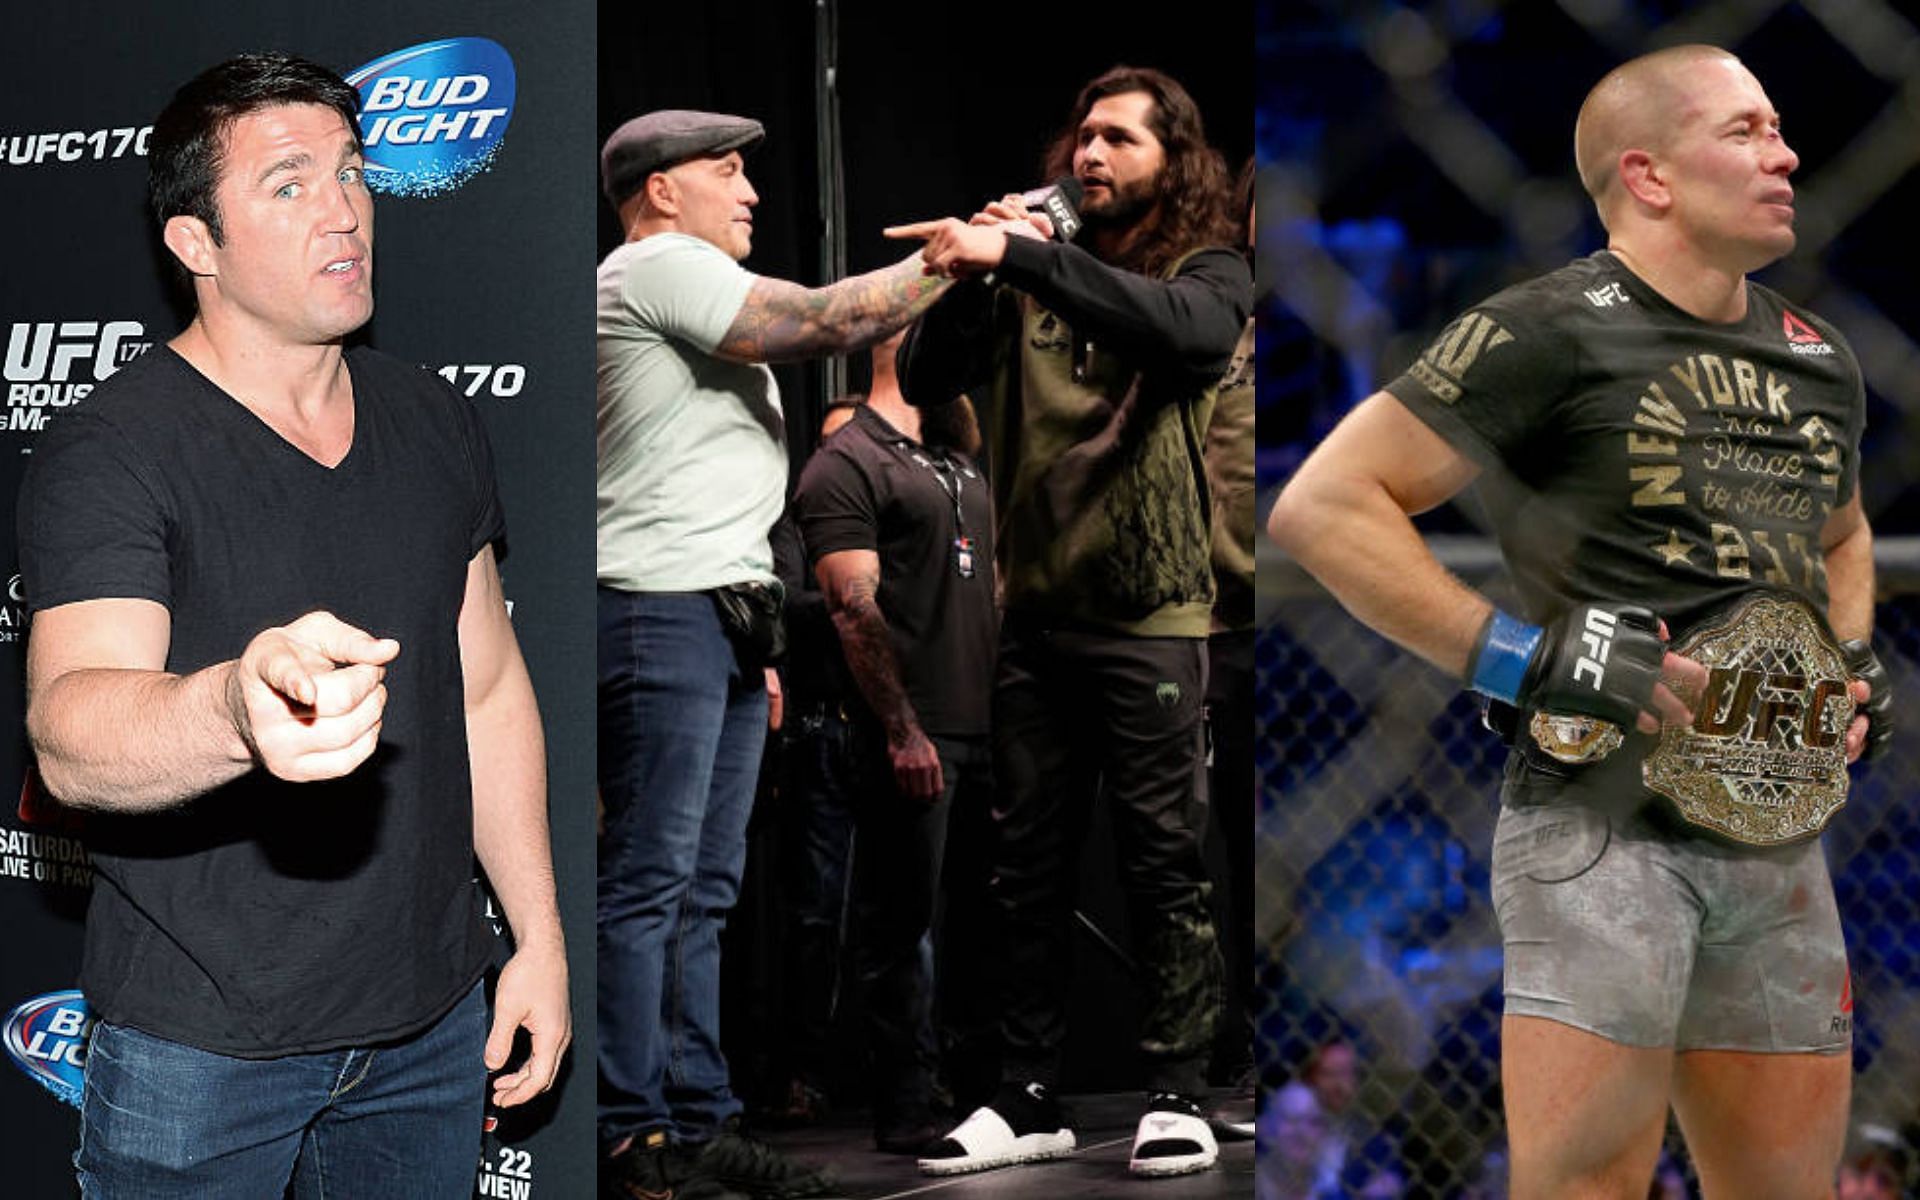 Chael Sonnen (left); Joe Rogan and Jorge Masvidal (center) [image courtesy of Mike Roach/Zuffa LLC via Getty Images]; Georges St-Pierre (right)